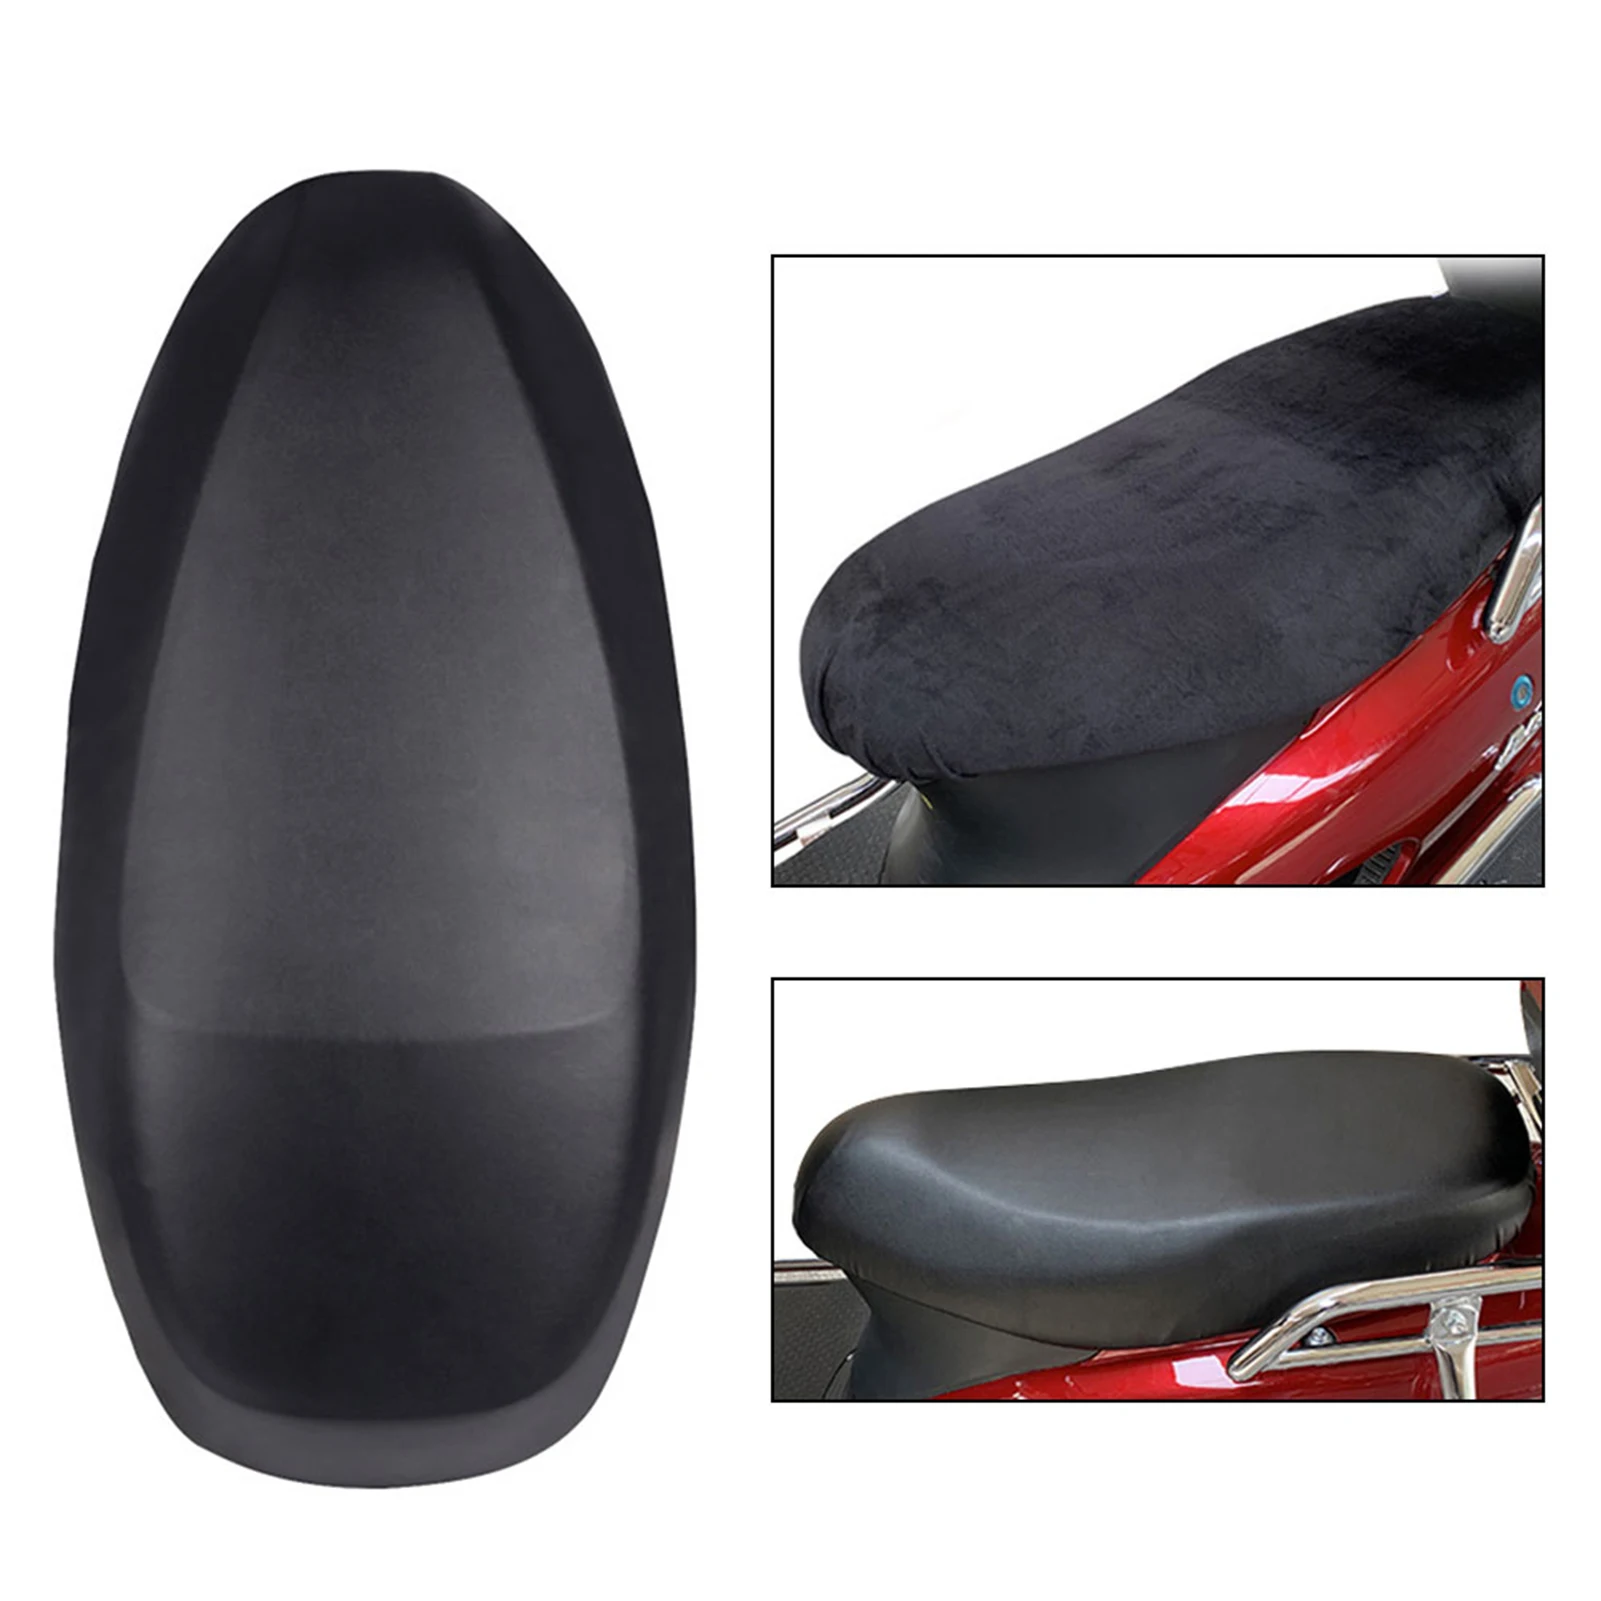 

Motorcycle Cover Lightweight Seat Cover Outdoor Waterproof Rain Dust UV Protector Fits Most Sport Adventure Touring Cruiser